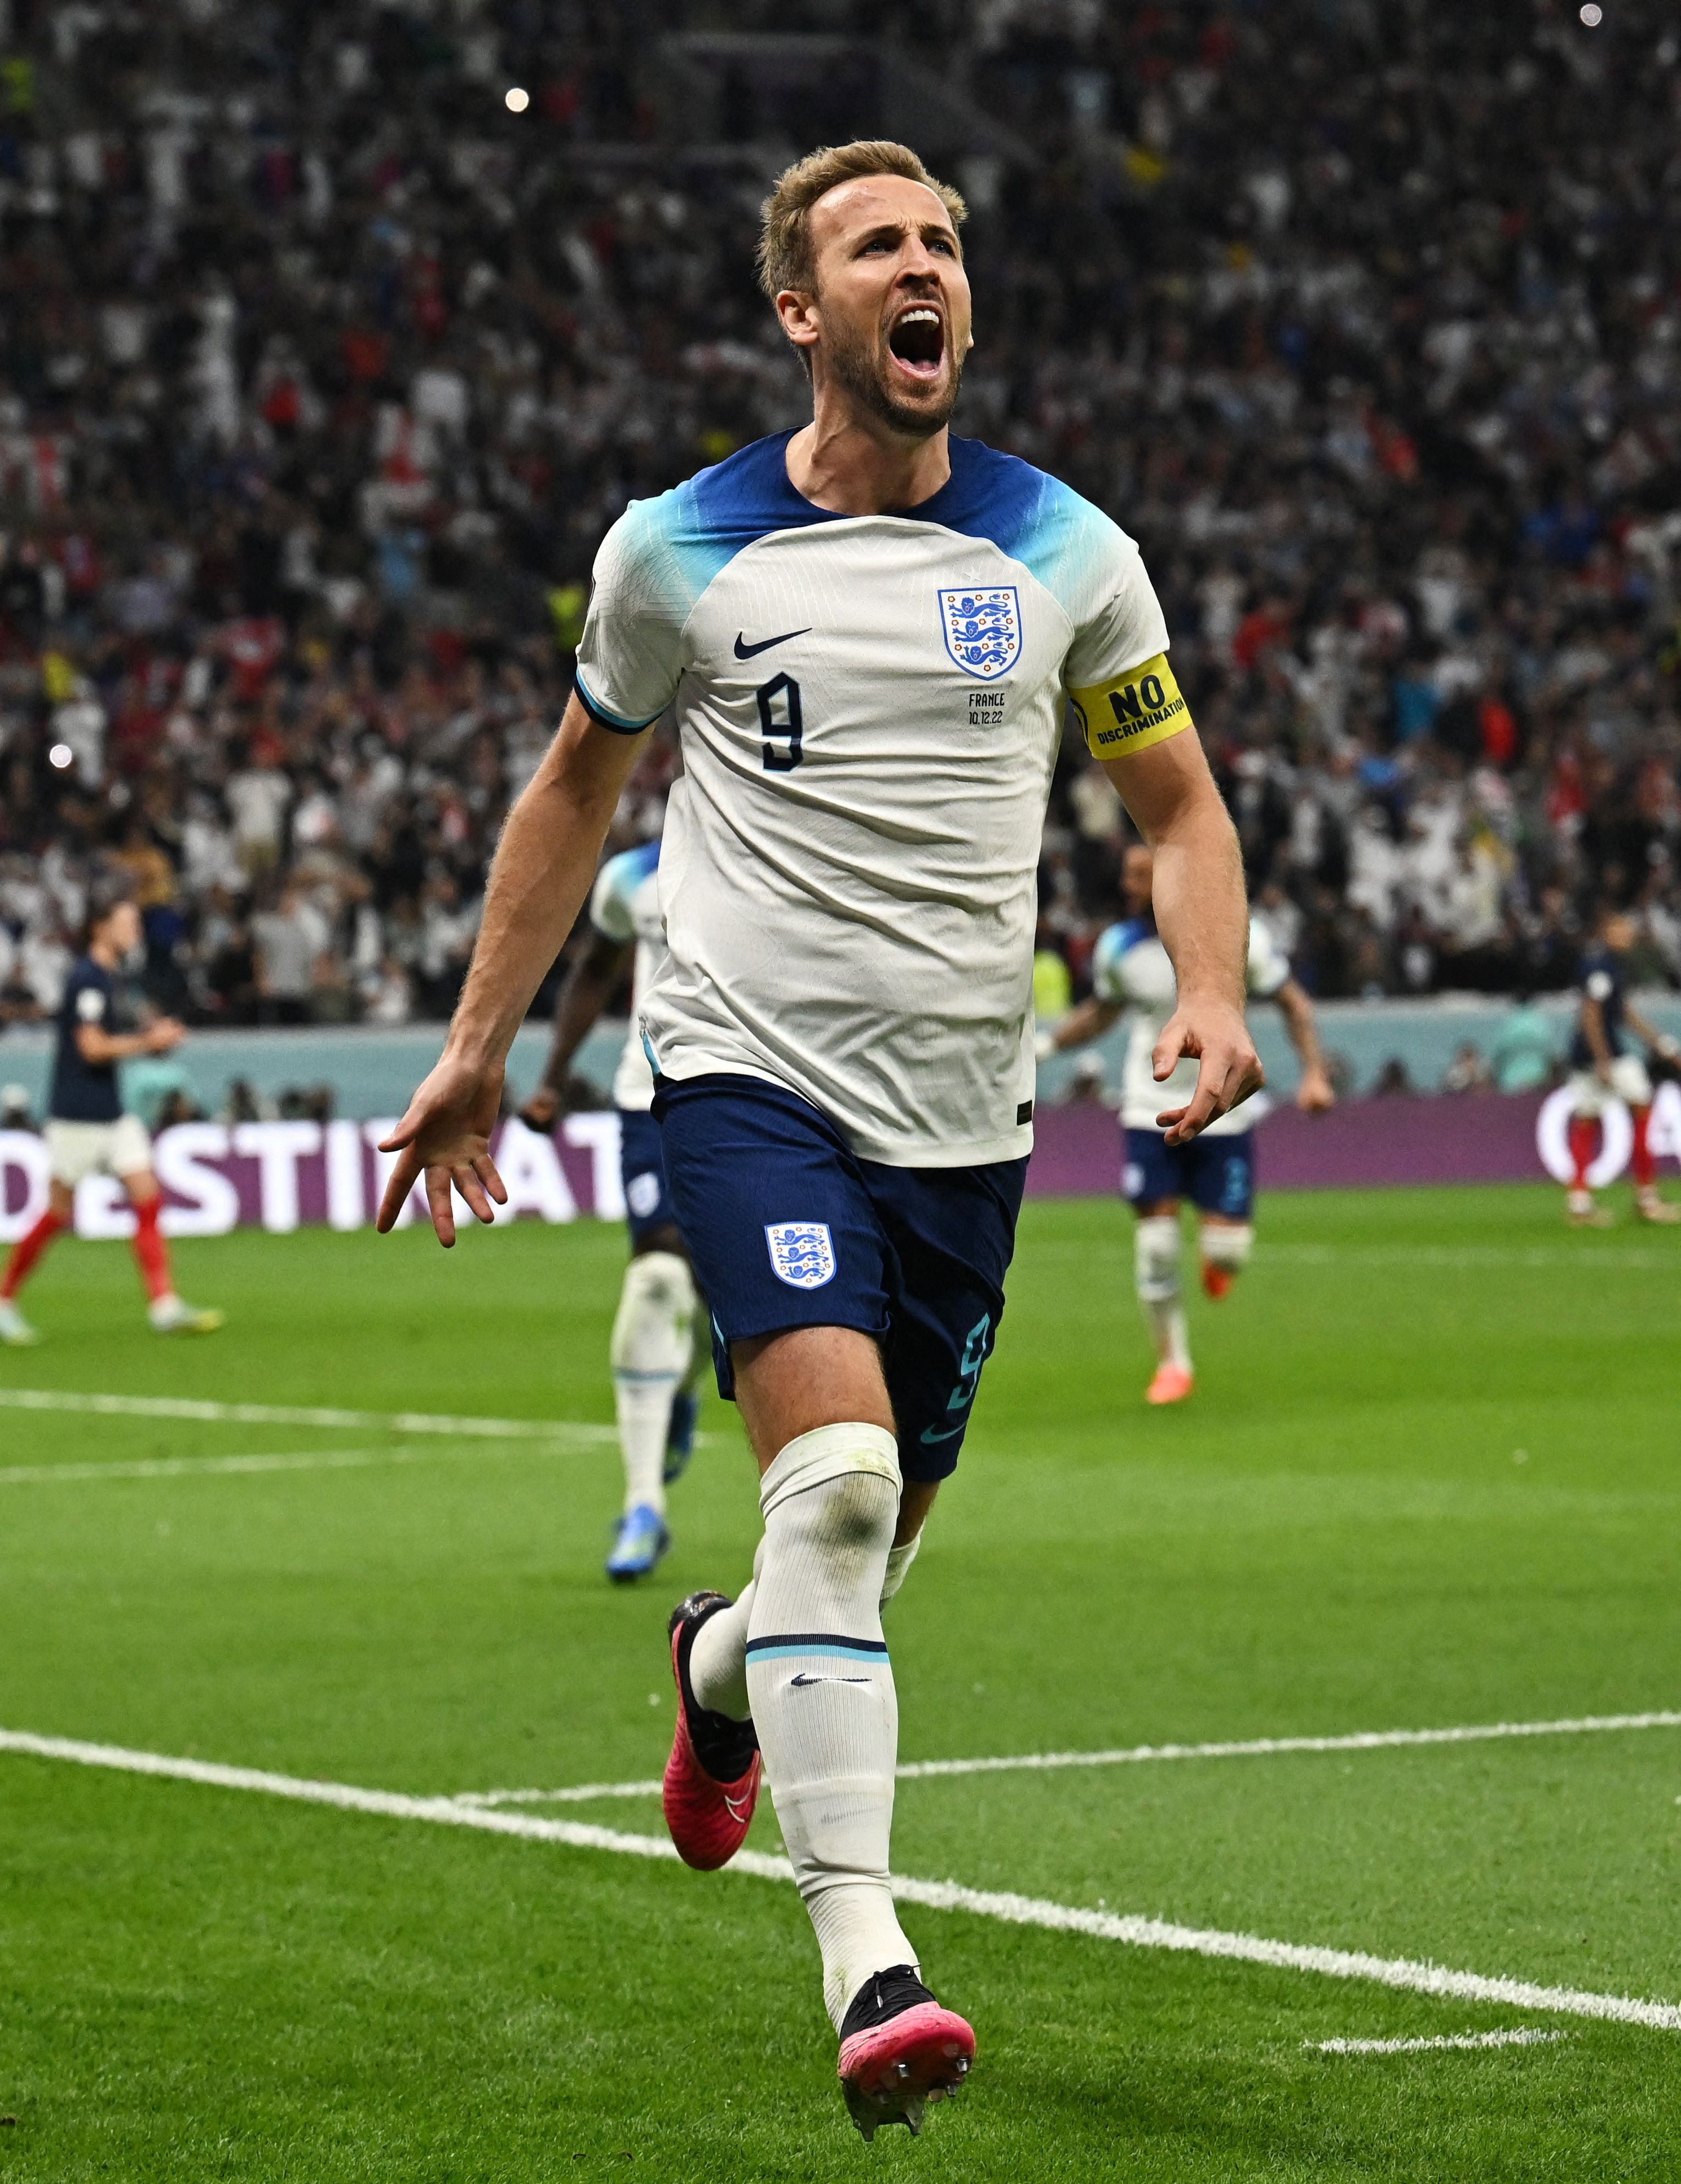 Kane scores for England at the World Cup.